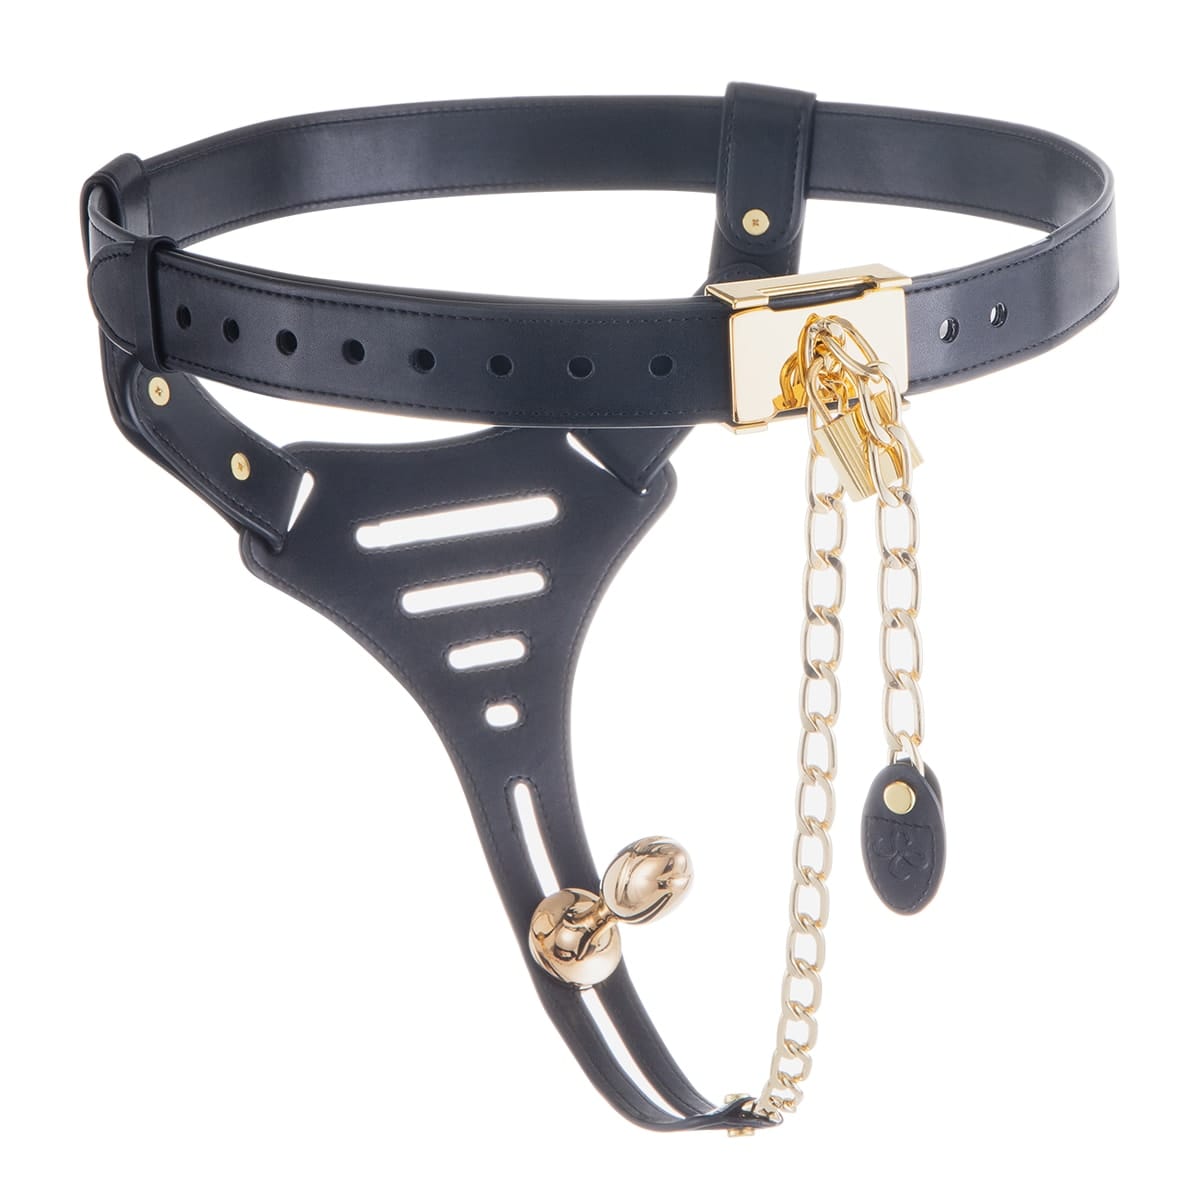 A visually appealing image of SEVANDA Female Chastity Belt, symbolizing submission and surrender to a dominant partner.